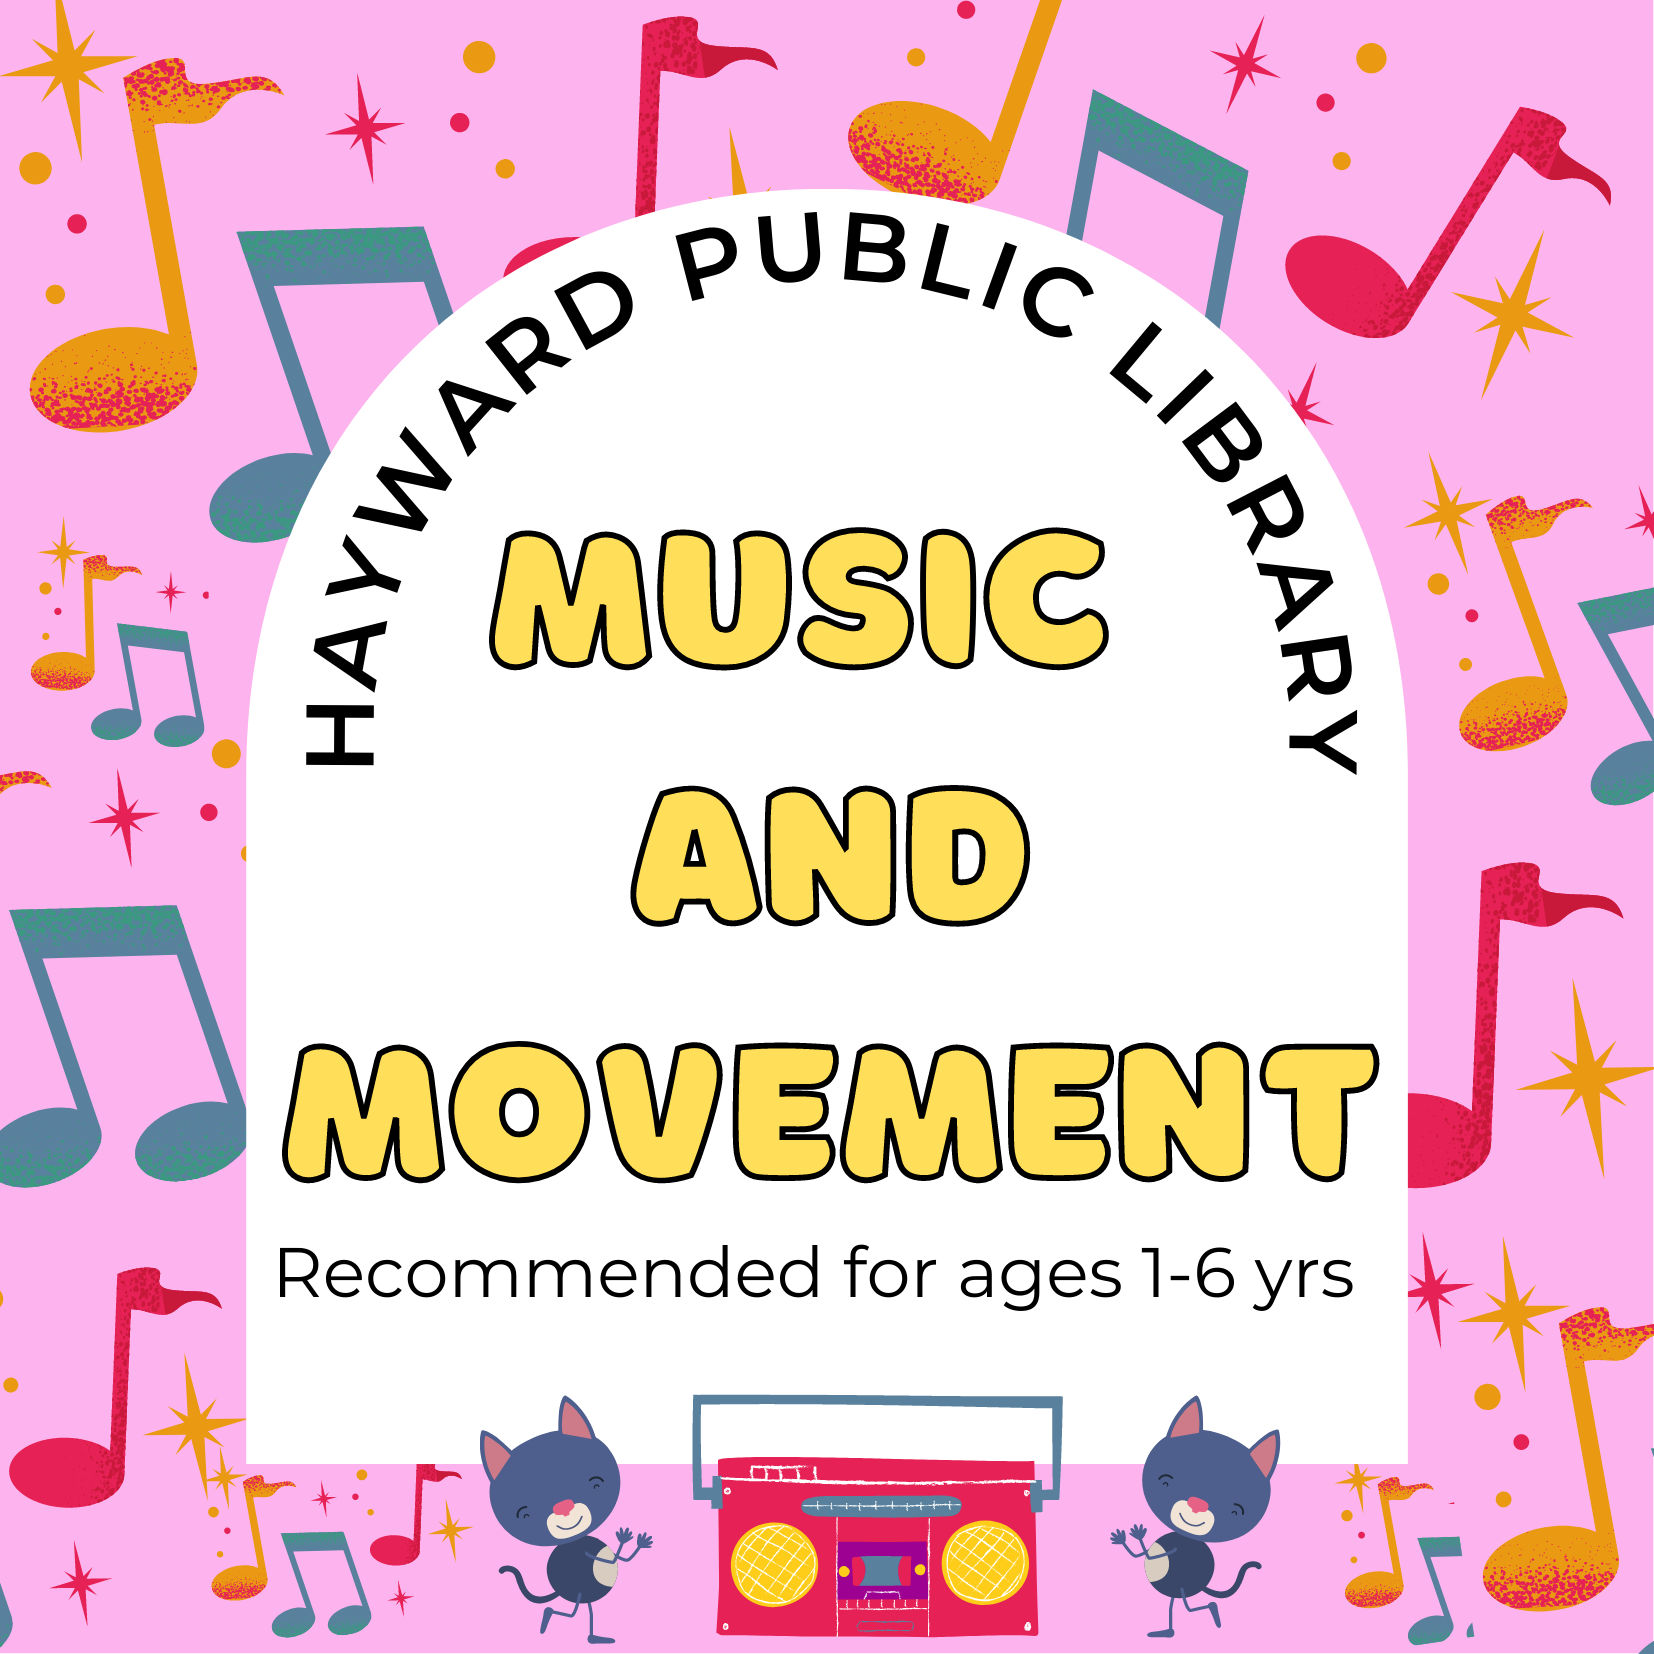  gray cats dancing on the side of dark pink radio. Text is black and yellow, reads hayward public library music and movement recommended for ages 1-6 years